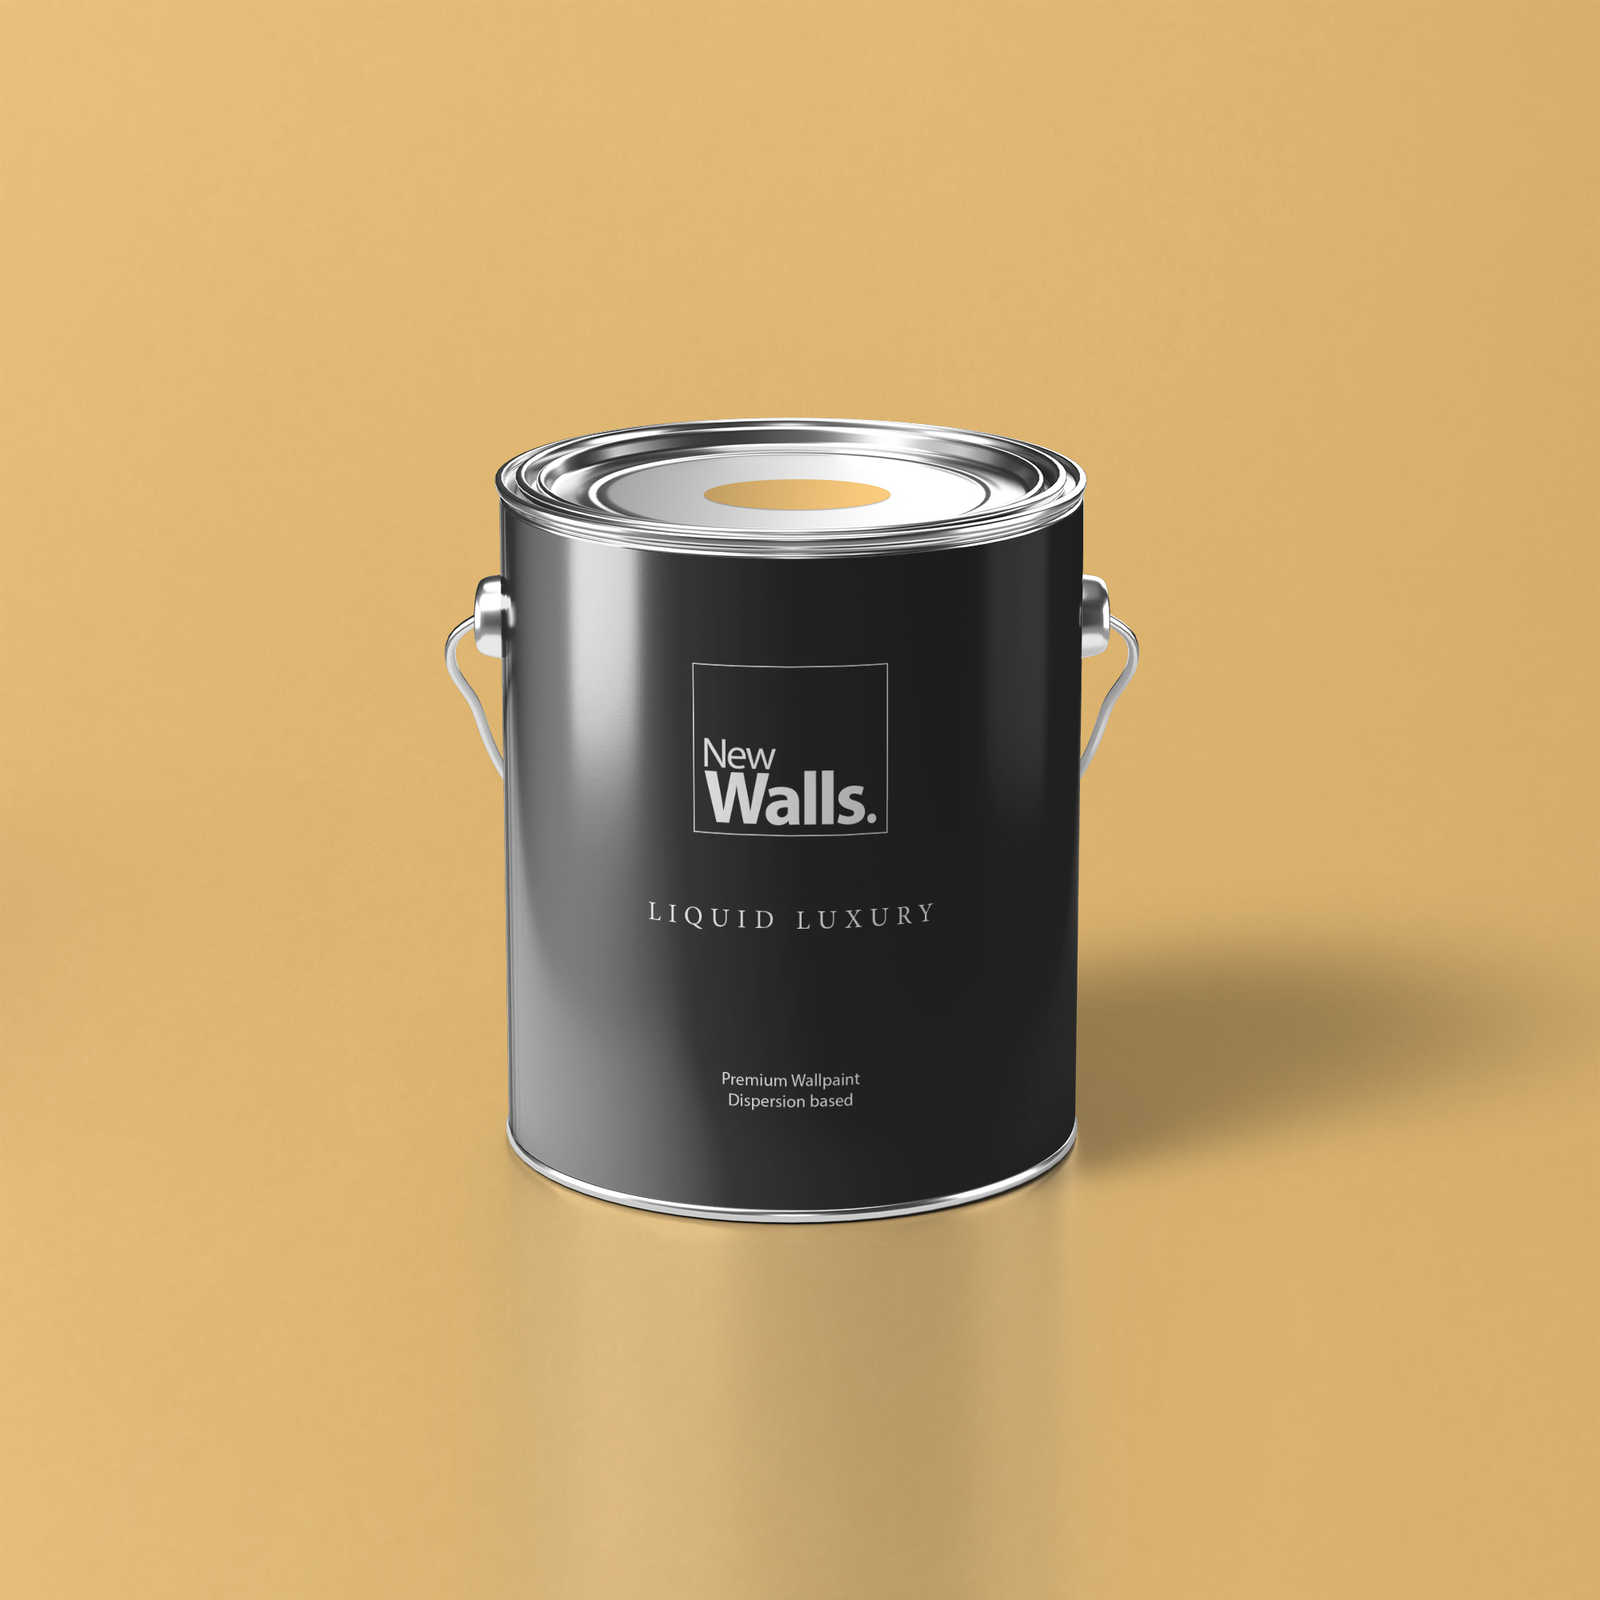 Premium Wall Paint cheerful gold »Juicy Yellow« NW804 – 5 litre
